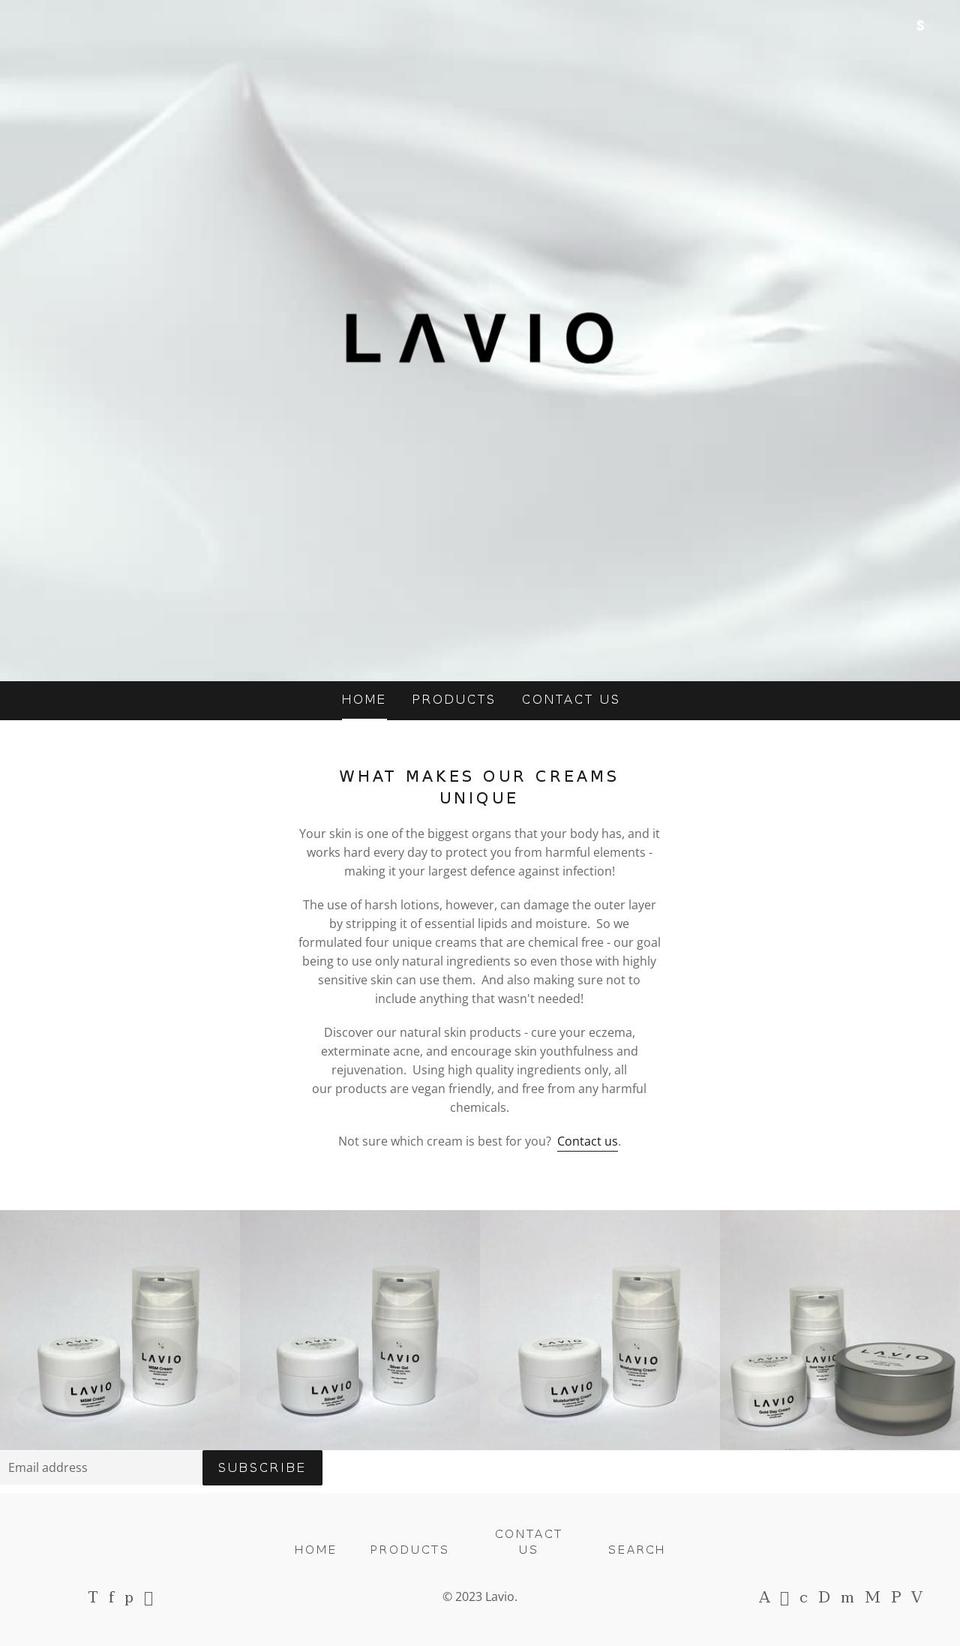 Current Shopify theme site example lavio.uk